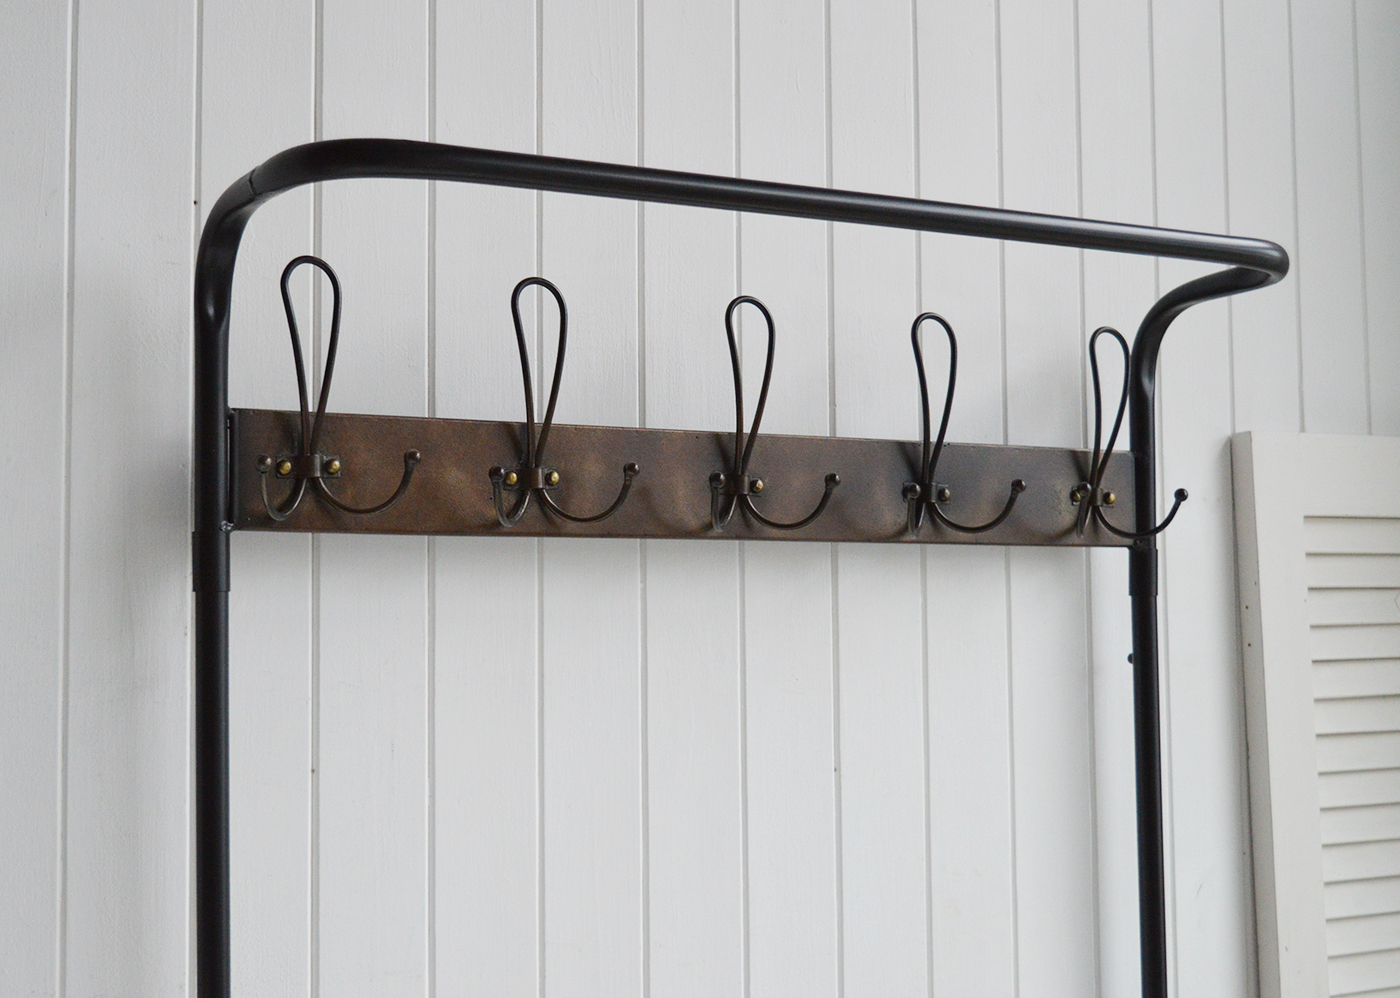 Windsor Hallway Stand - Bench Seat, shelf and Coat Rack for complete Hall Entry Way in antiqued black metal for modern farmhouse, coastal and country New England Interiors. Photo shows the coat rack from the side